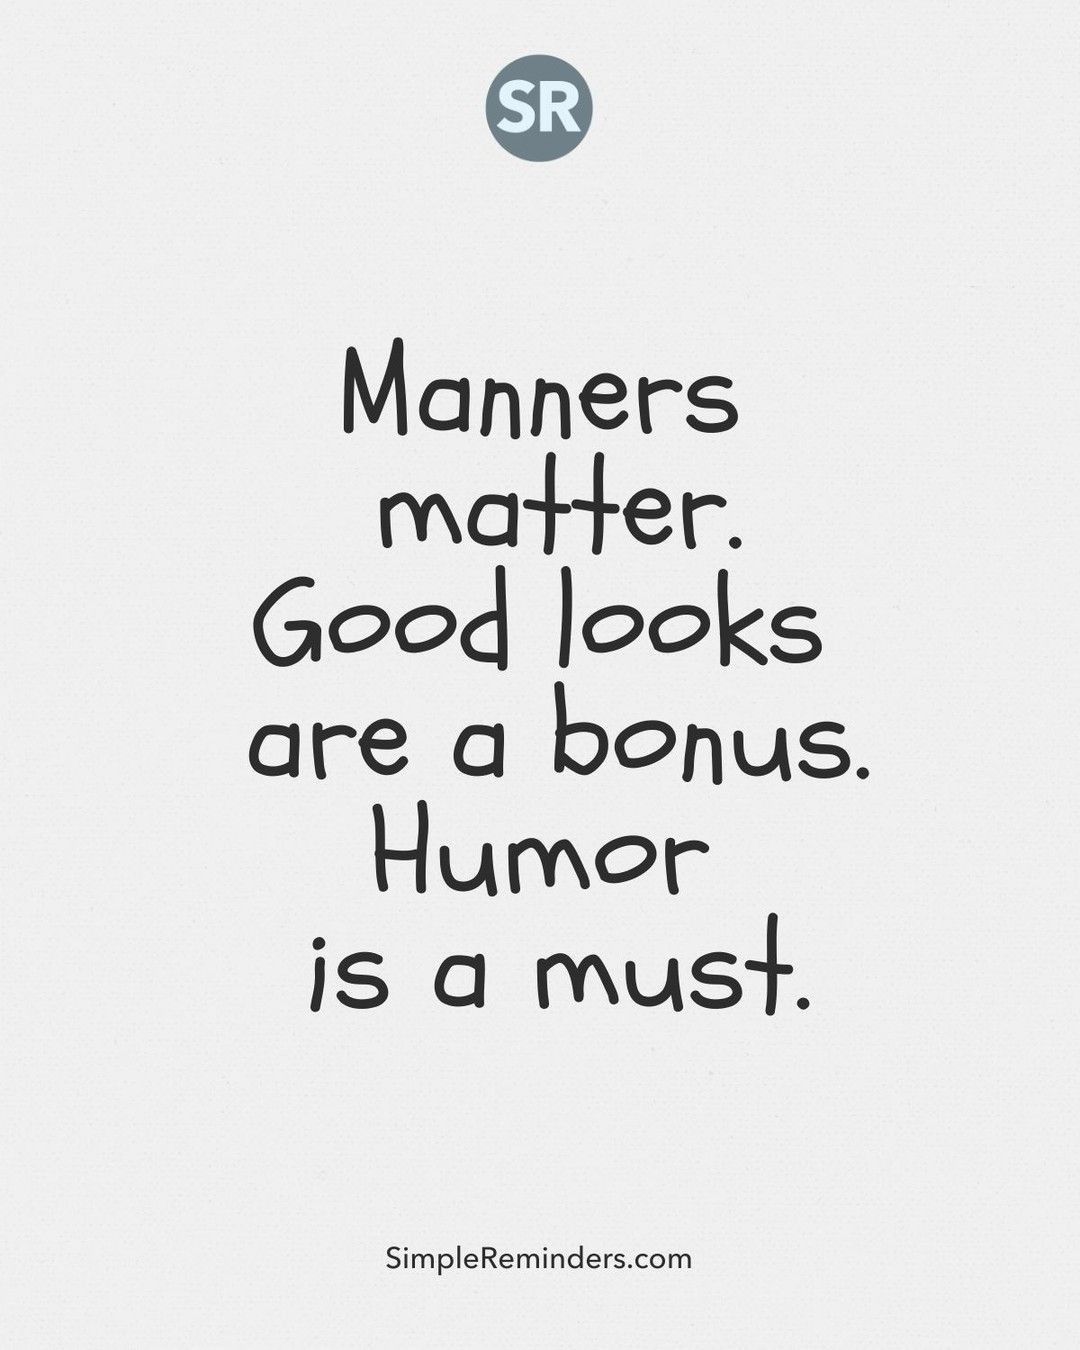 Simple Reminders on X: Manners matter. Good looks are a bonus. Humor is a  must. @GoMcGillMedia @JenniMcGill_ @BryantMcGill #SimpleReminders #quote  #manners #life #beauty #looks #beautiful #sexy #goodlooking #humor #funny  #fun #cute #pretty #